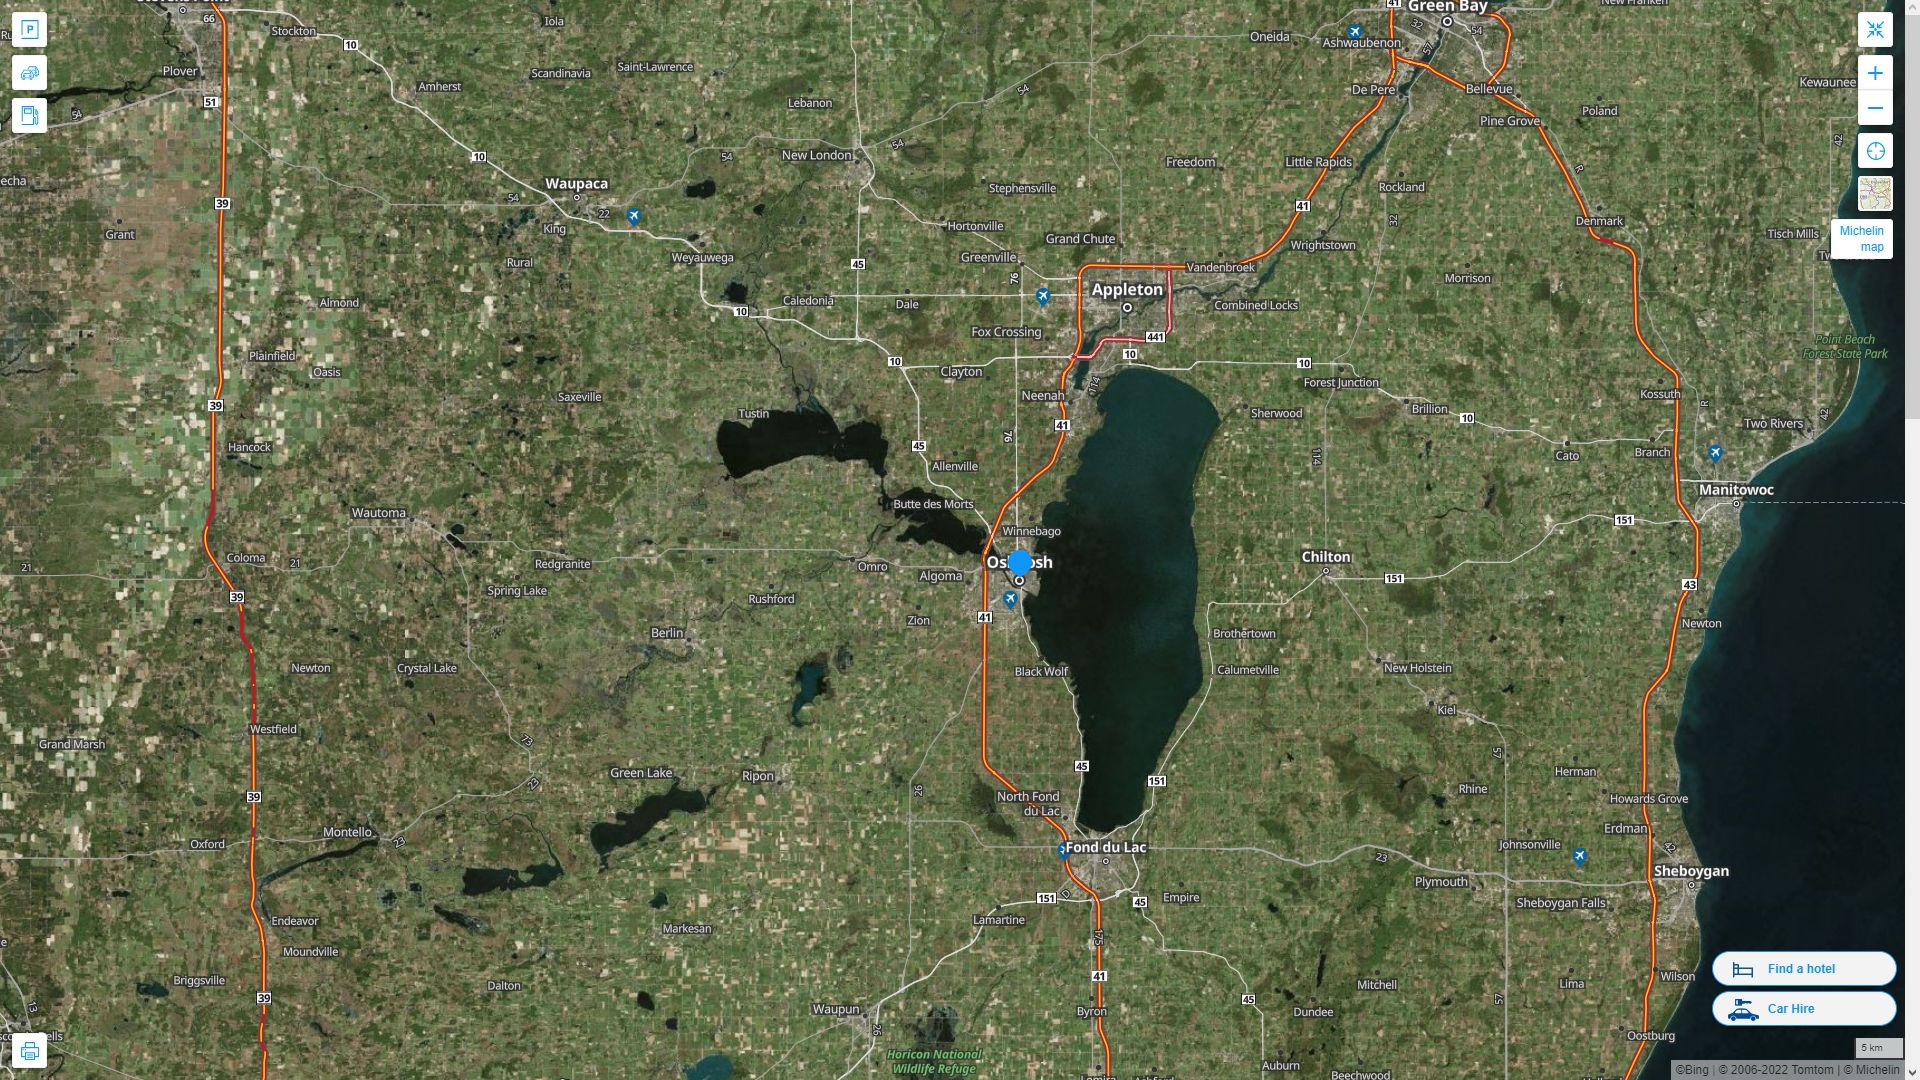 Oshkosh Wisconsin Highway and Road Map with Satellite View